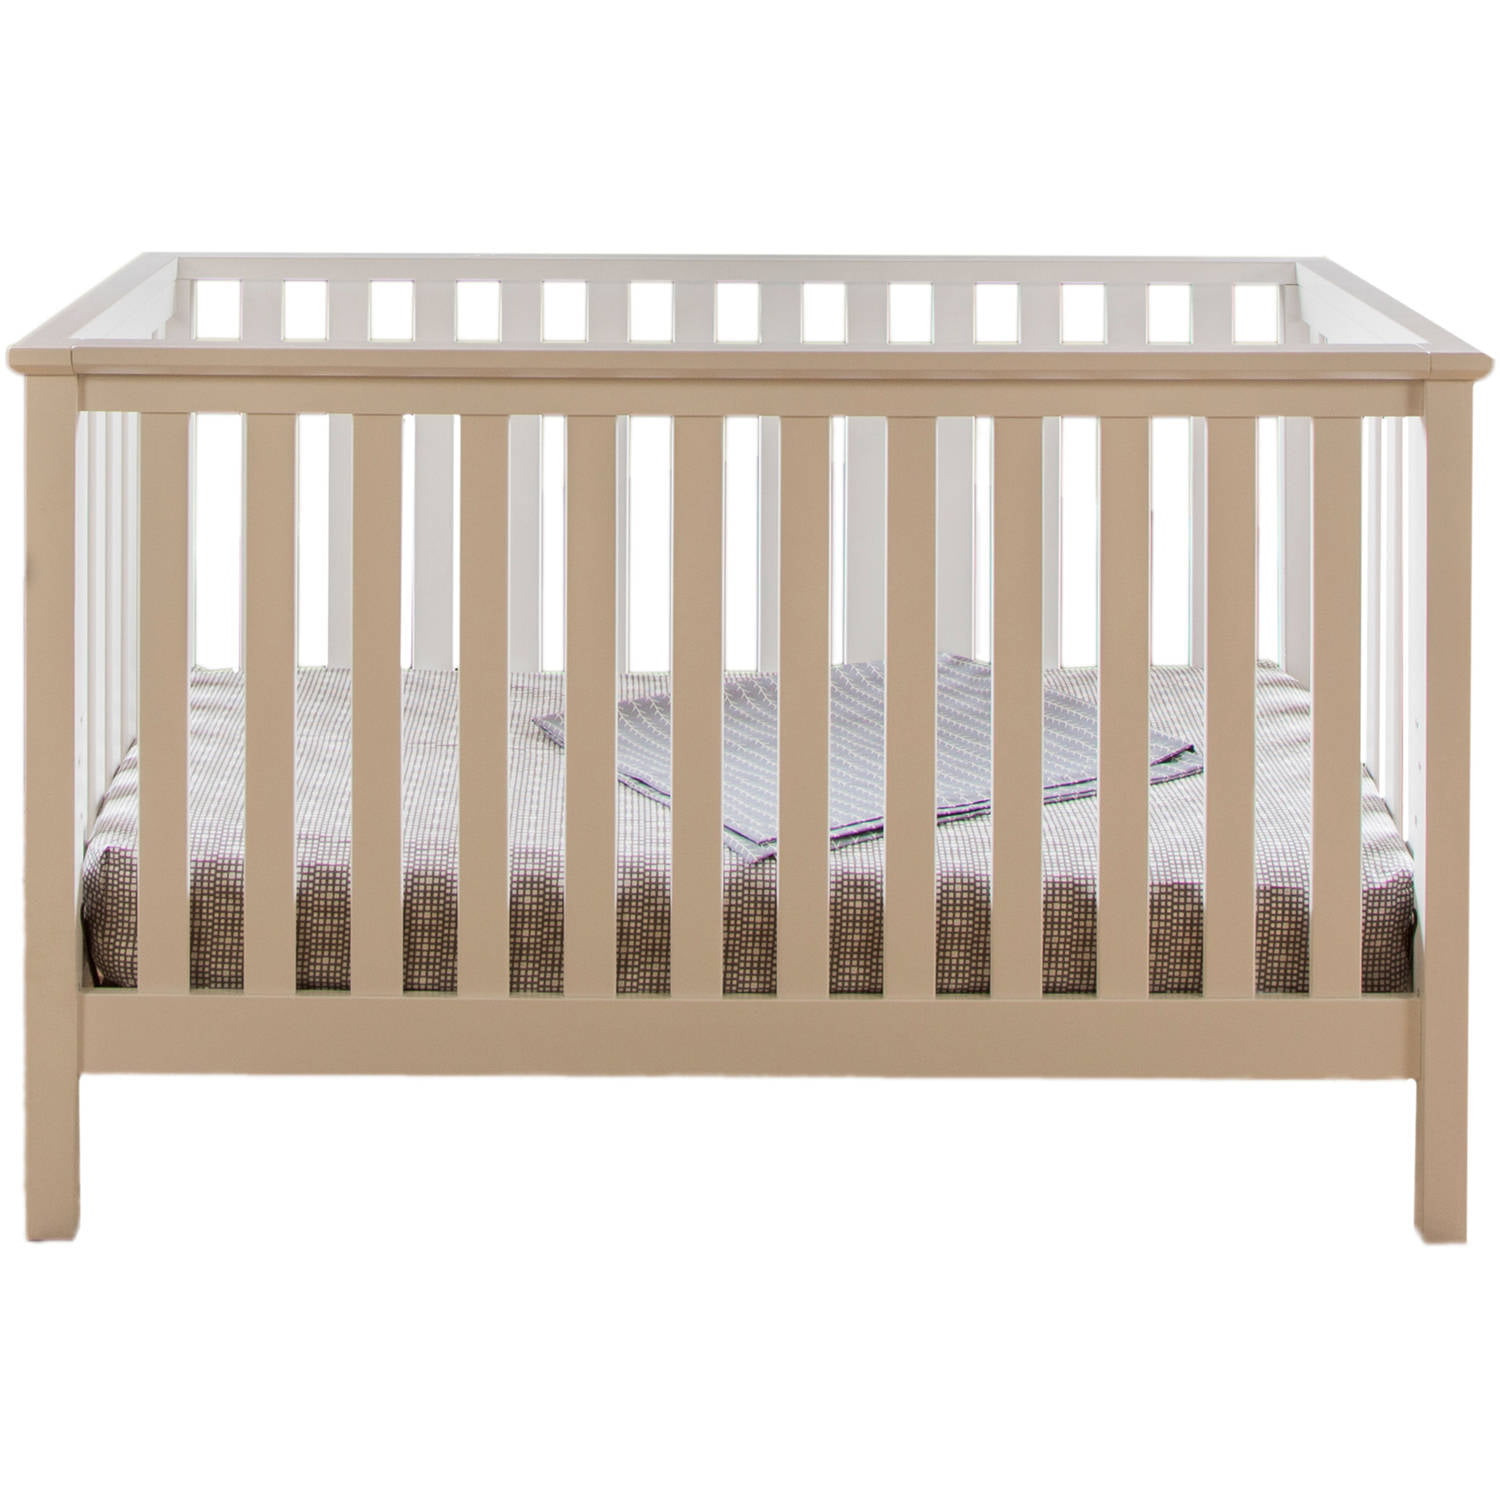 4 in one cot